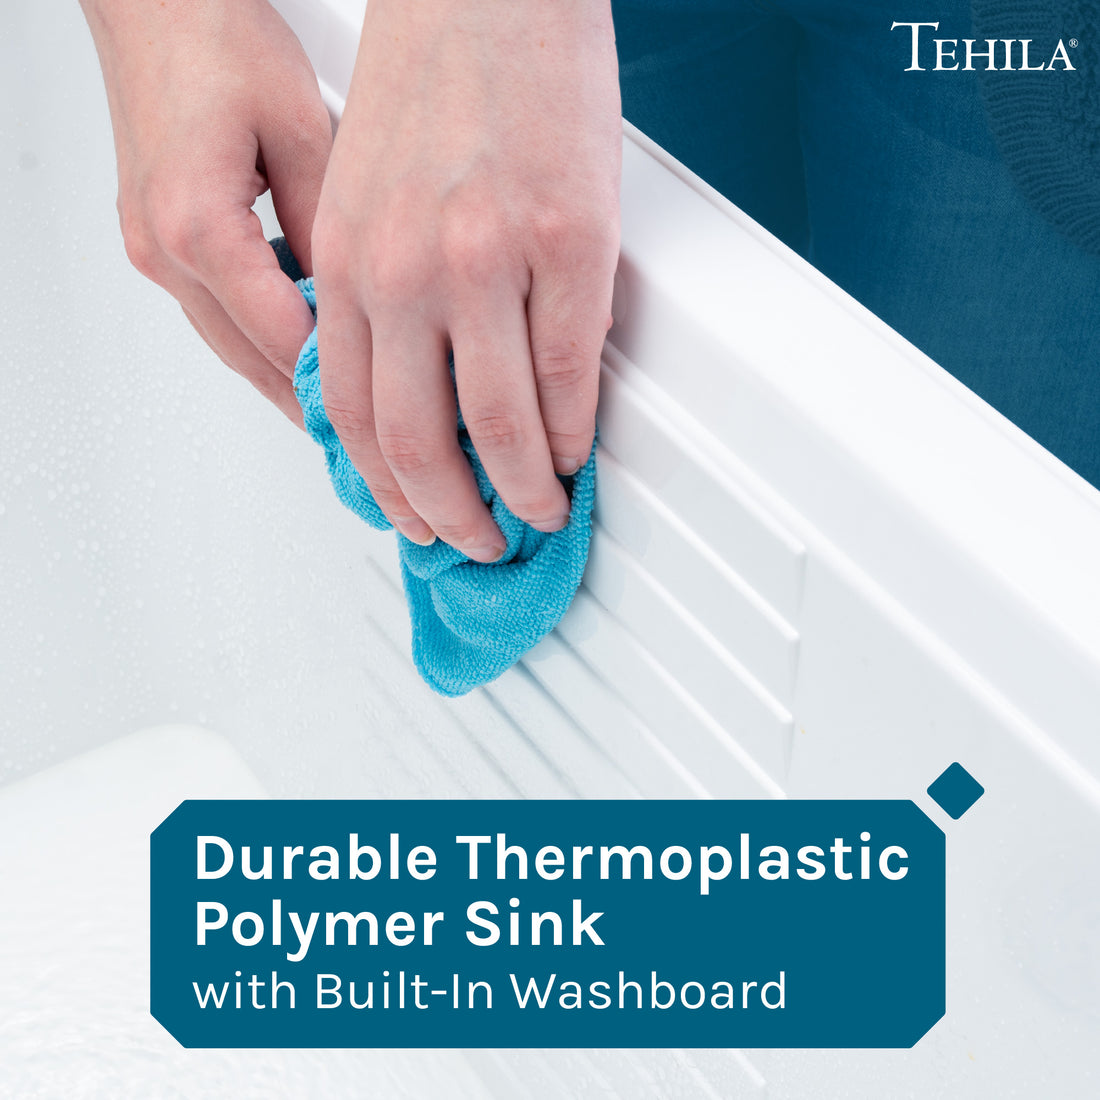 Tehila Durable Thermoplastic Polymer Sink with Built-In Washboard